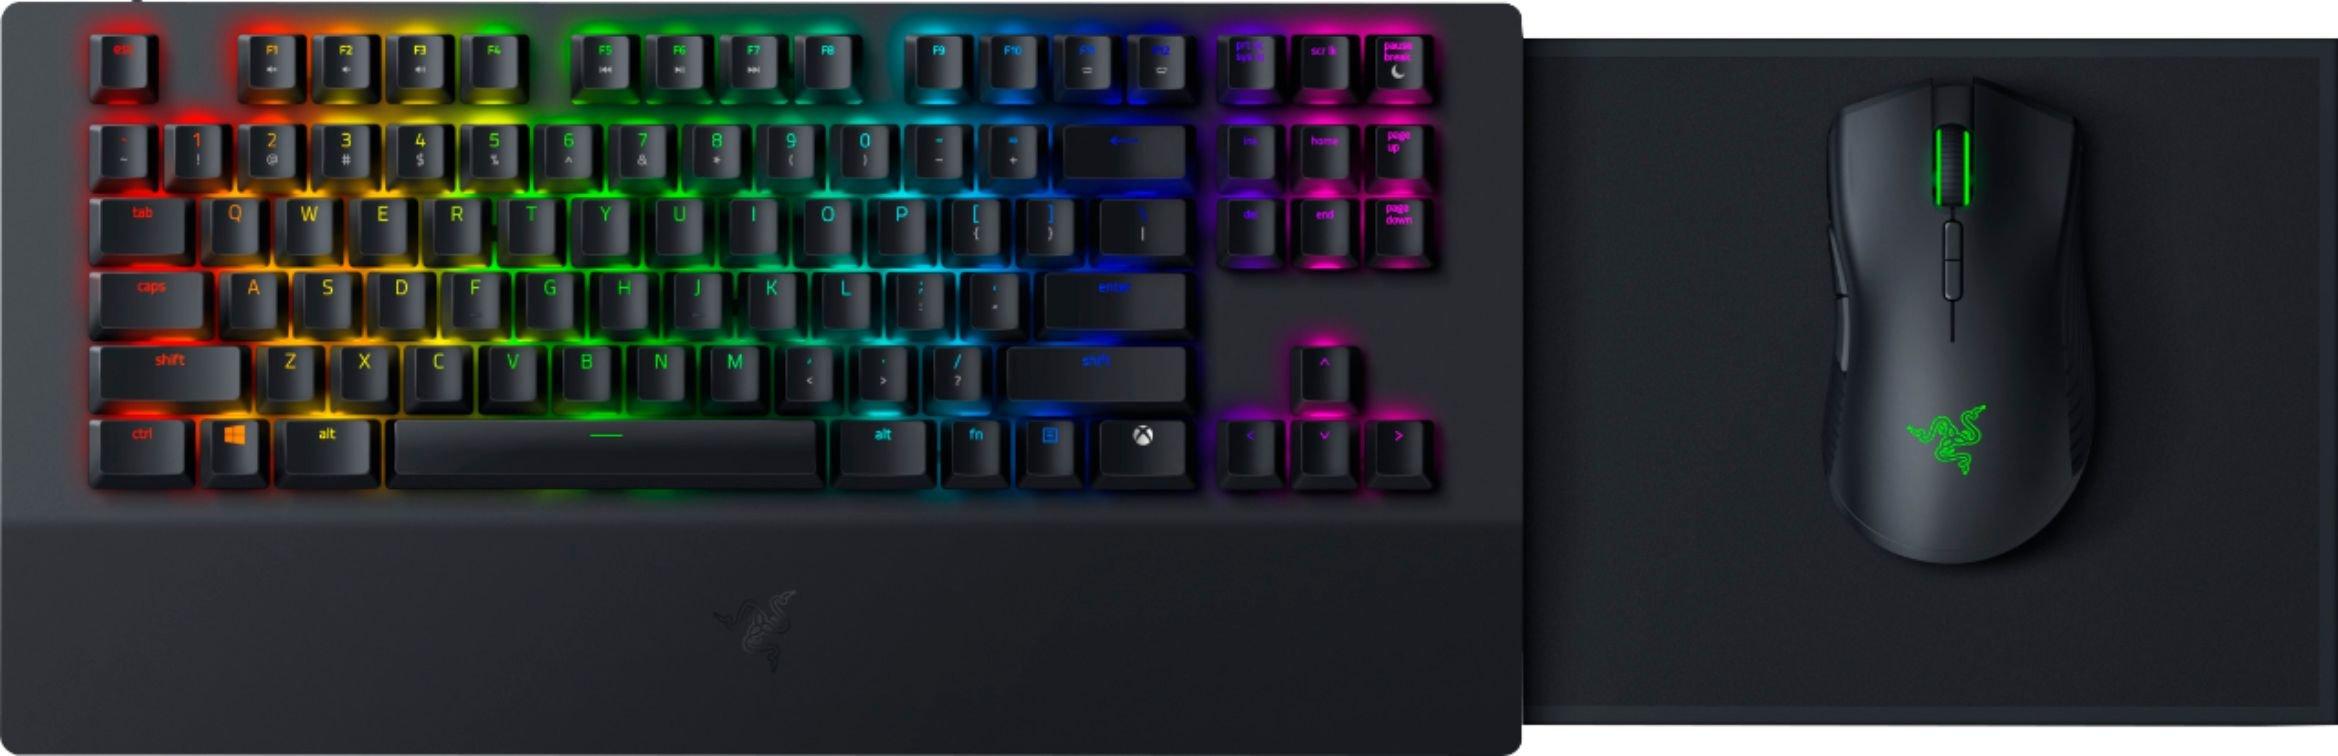 Xbox One Wireless Keyboard-Mouse, Razer Turret, Is Almost There - GameSpot